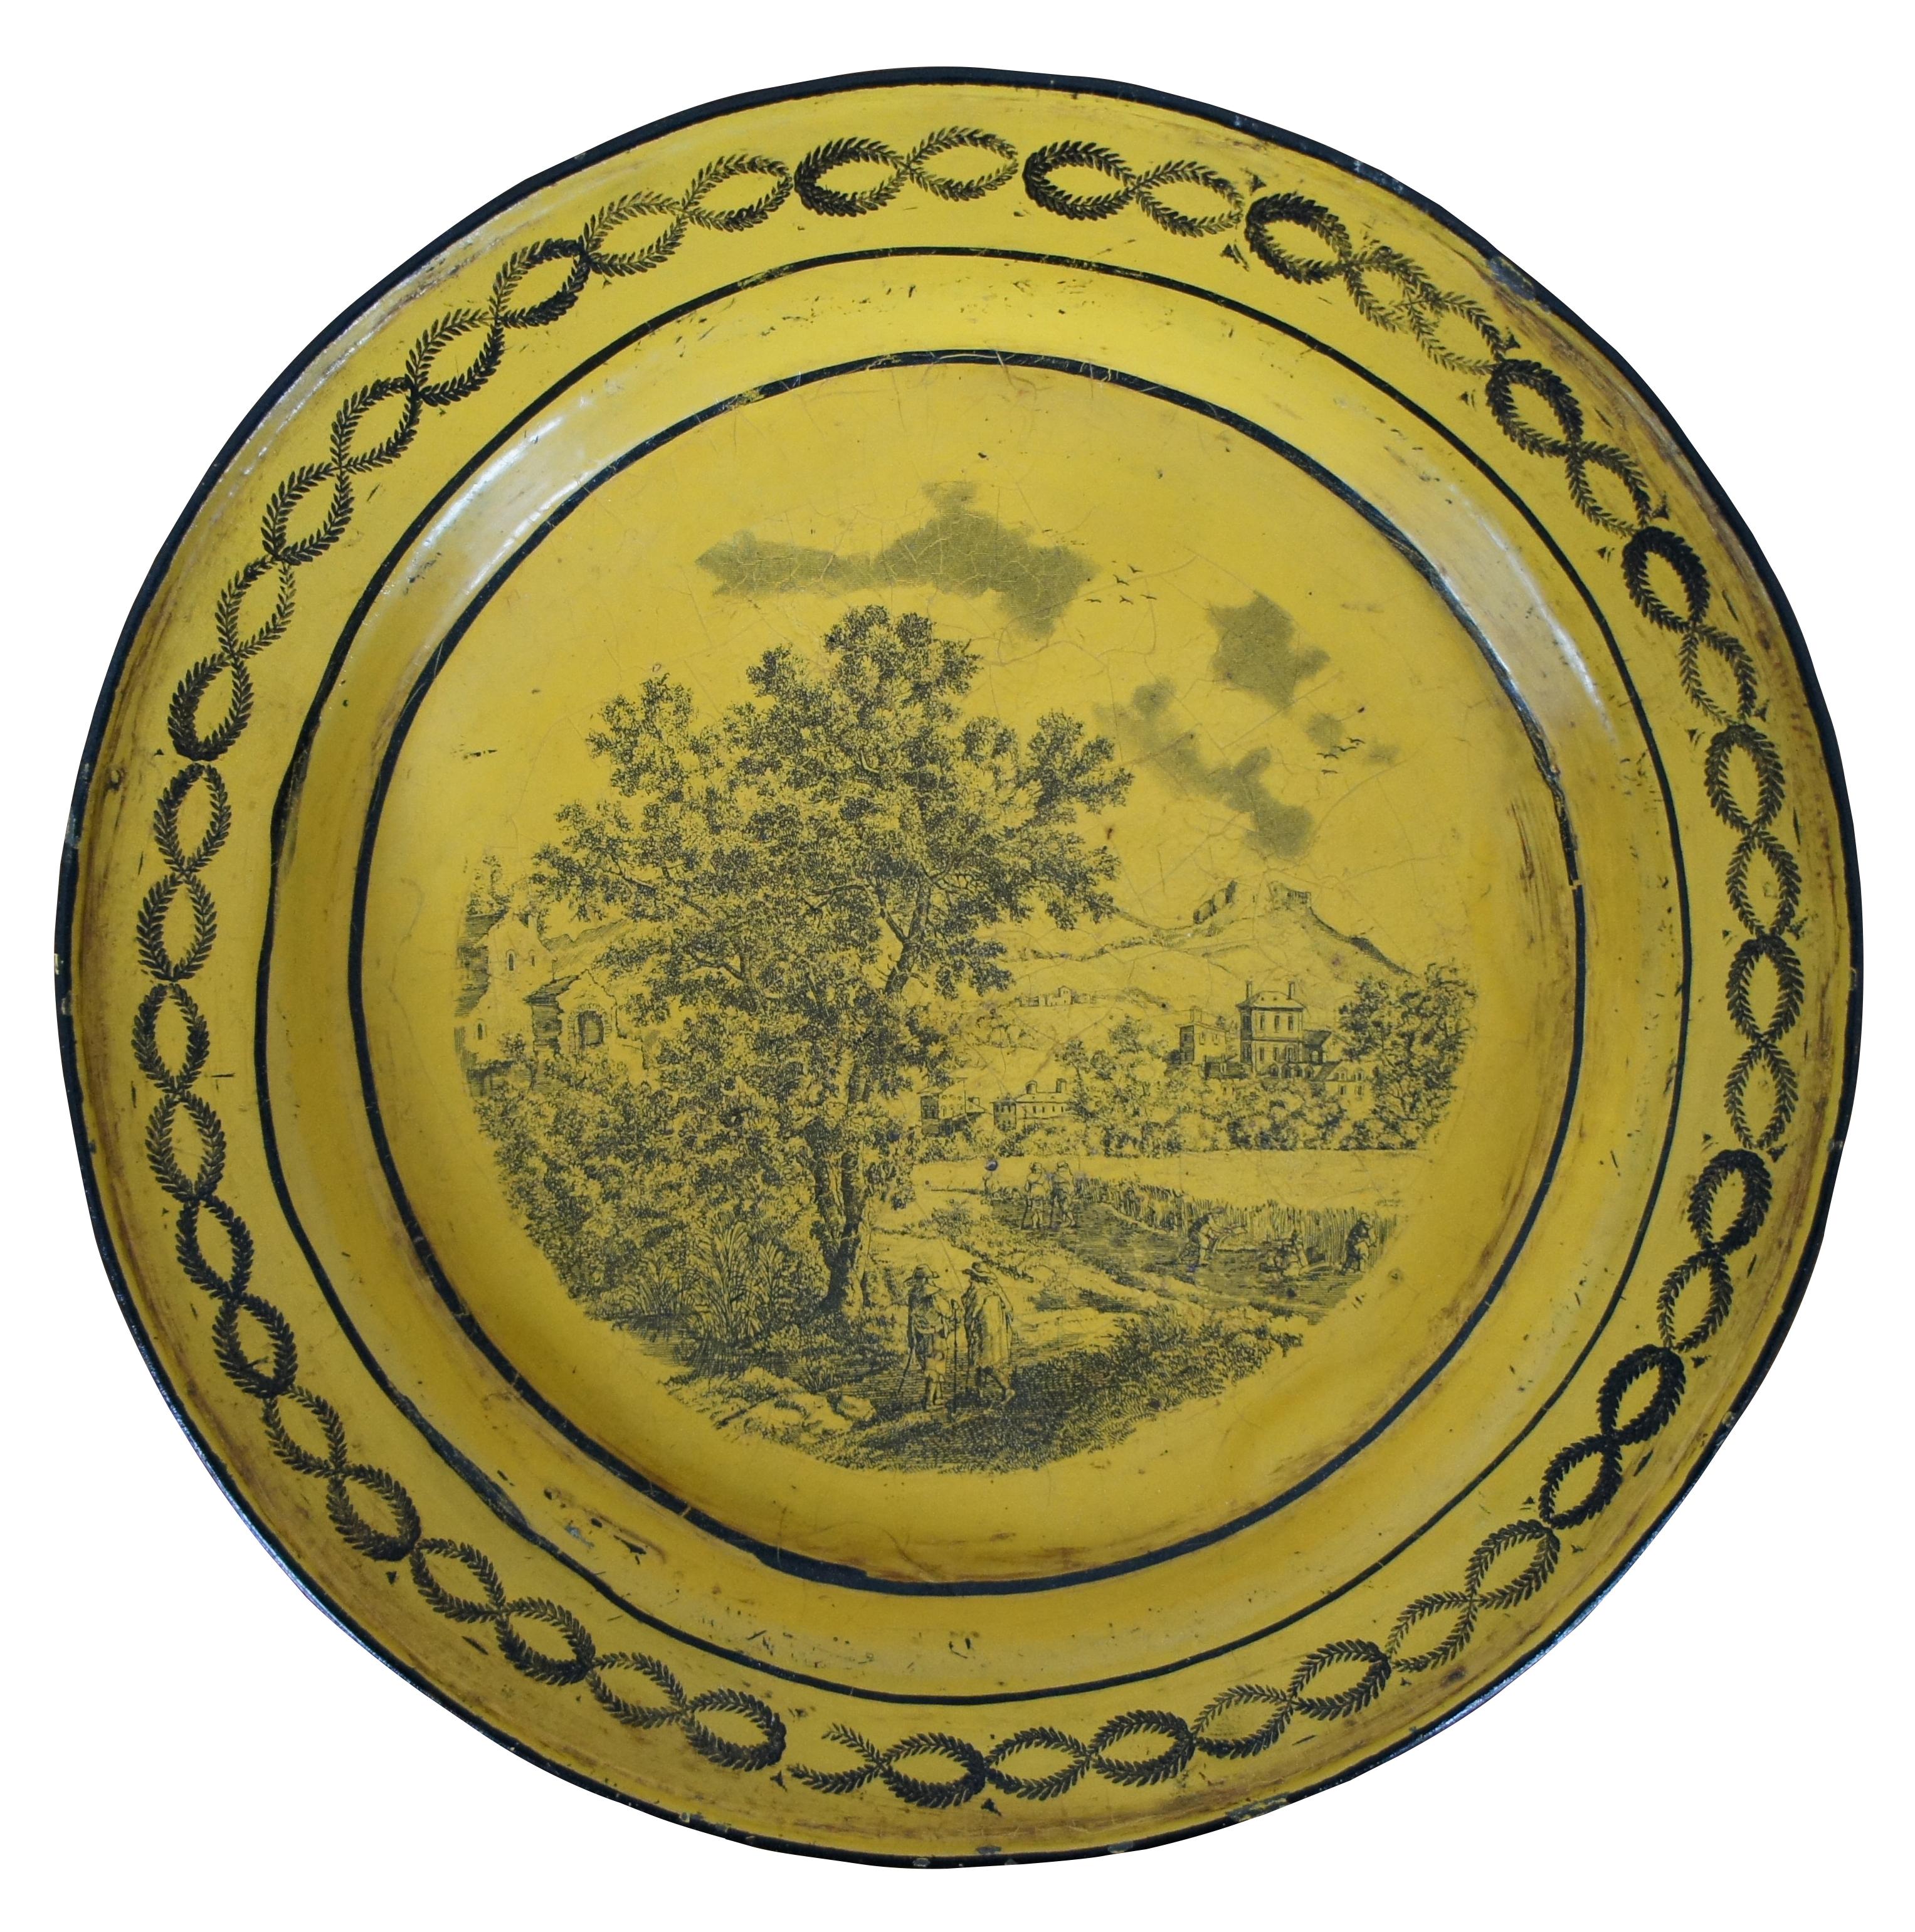 Antique metal tole ware Faience plate in mustard or canary yellow with transferware landscape scene and laurel wreath border. Measure: 9